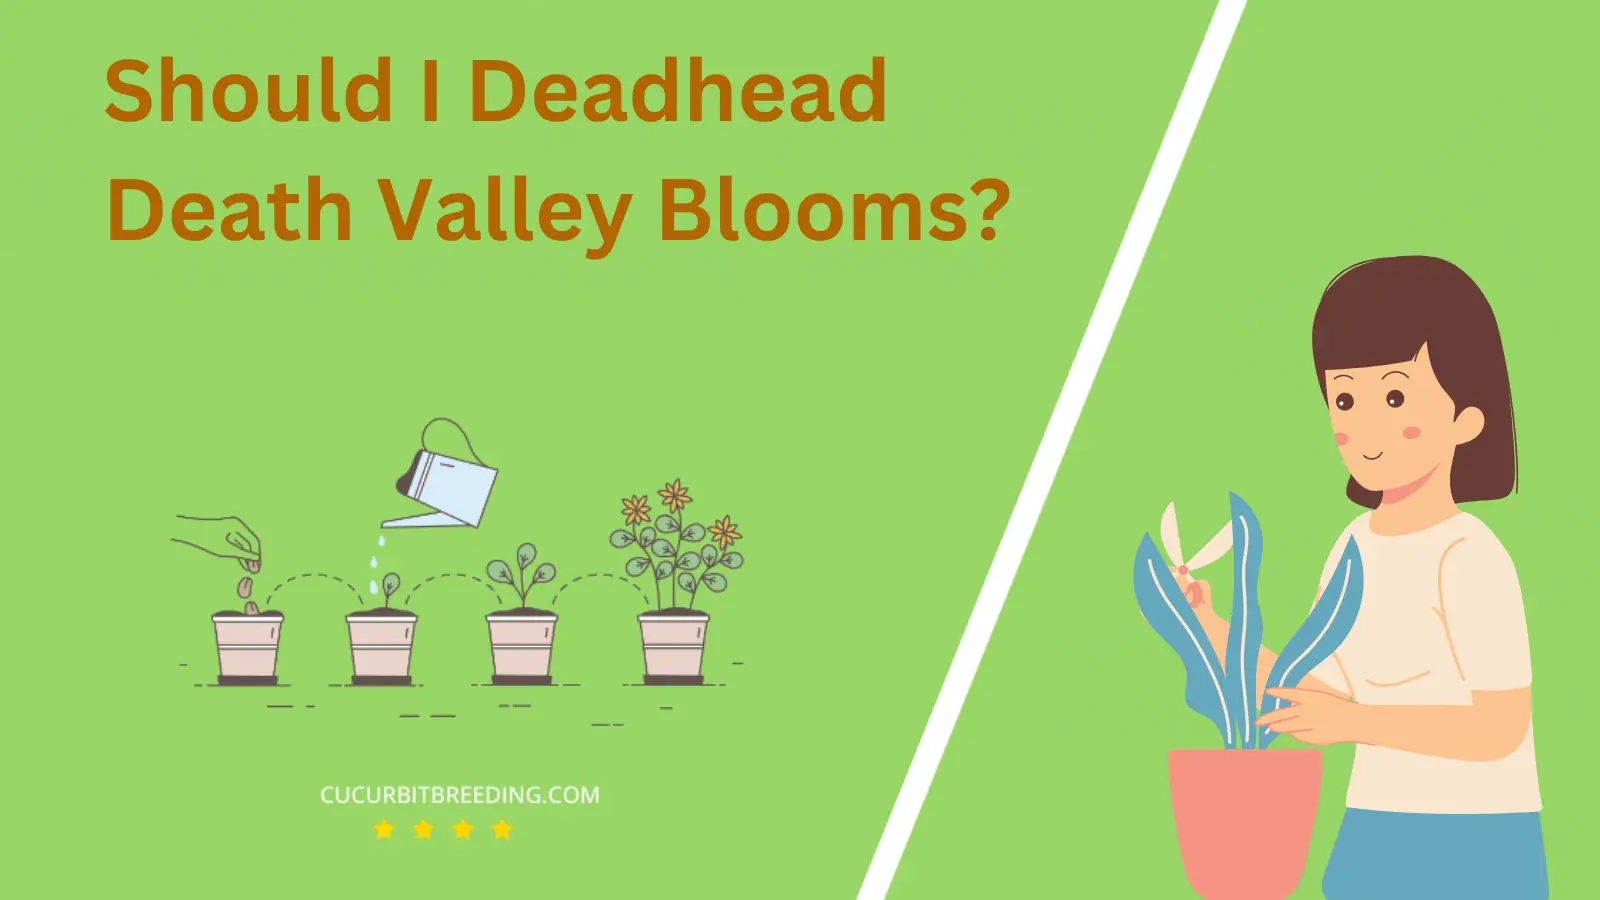 Should I Deadhead Death Valley Blooms?